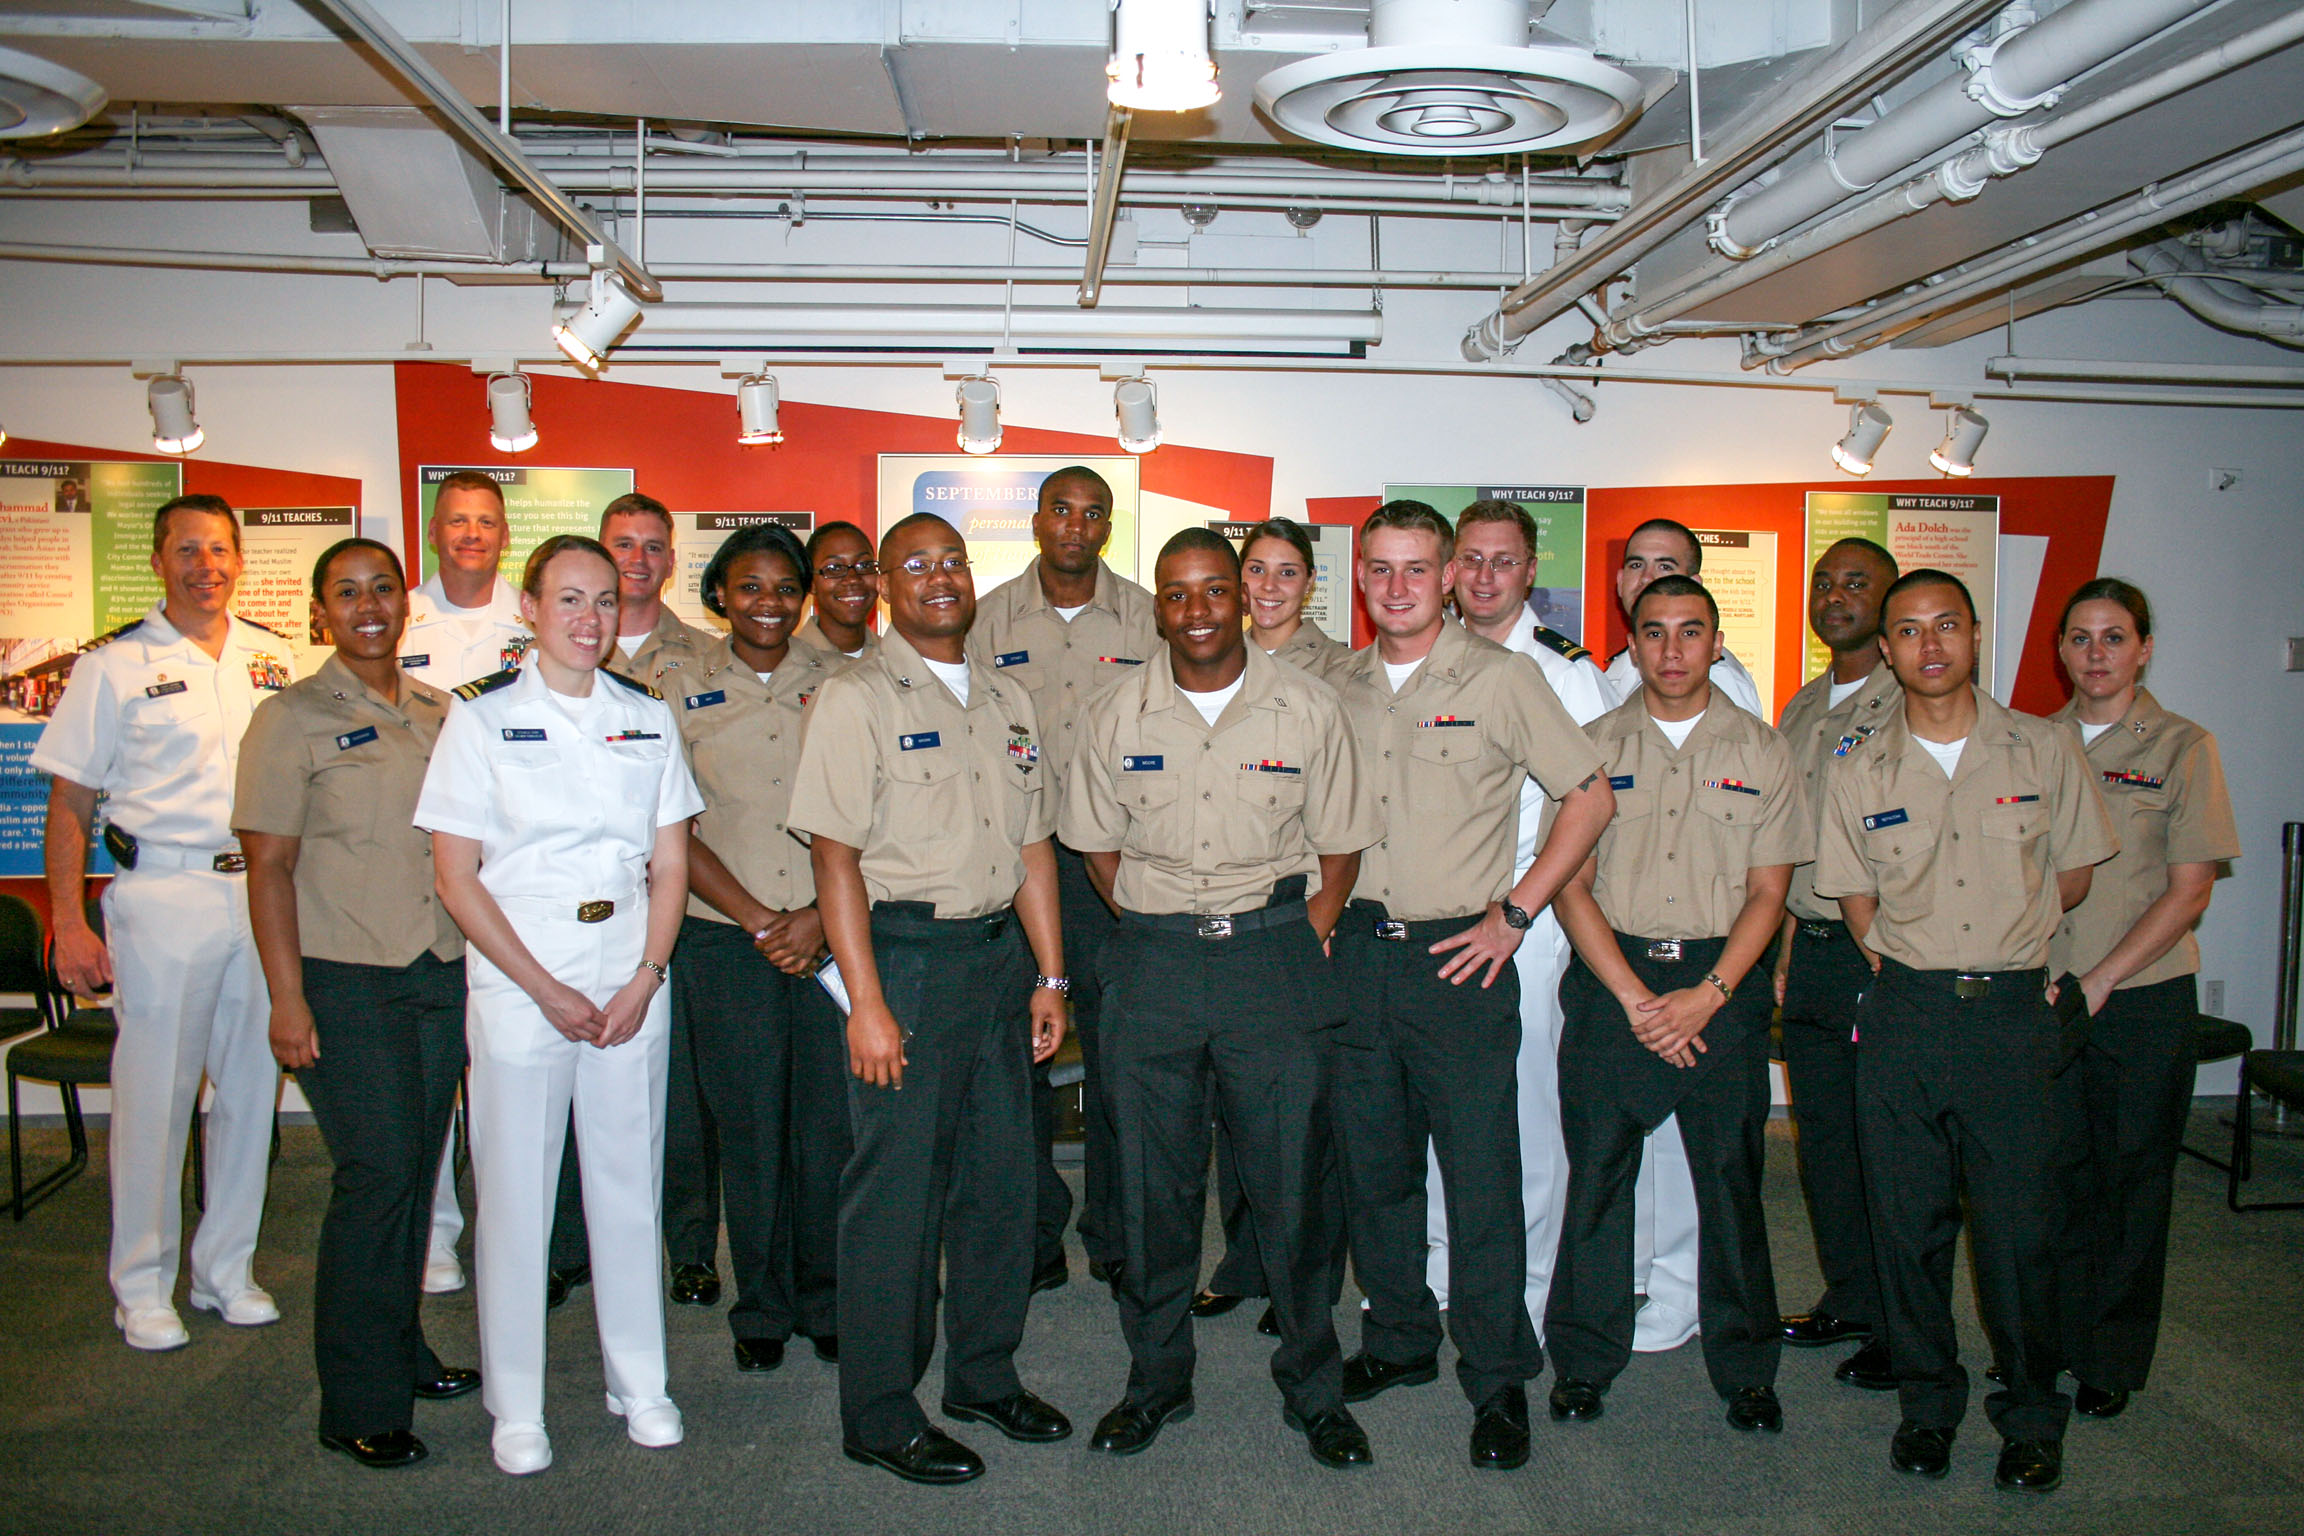 Crew members of the USS New York at the 9/11 Tribute Center.